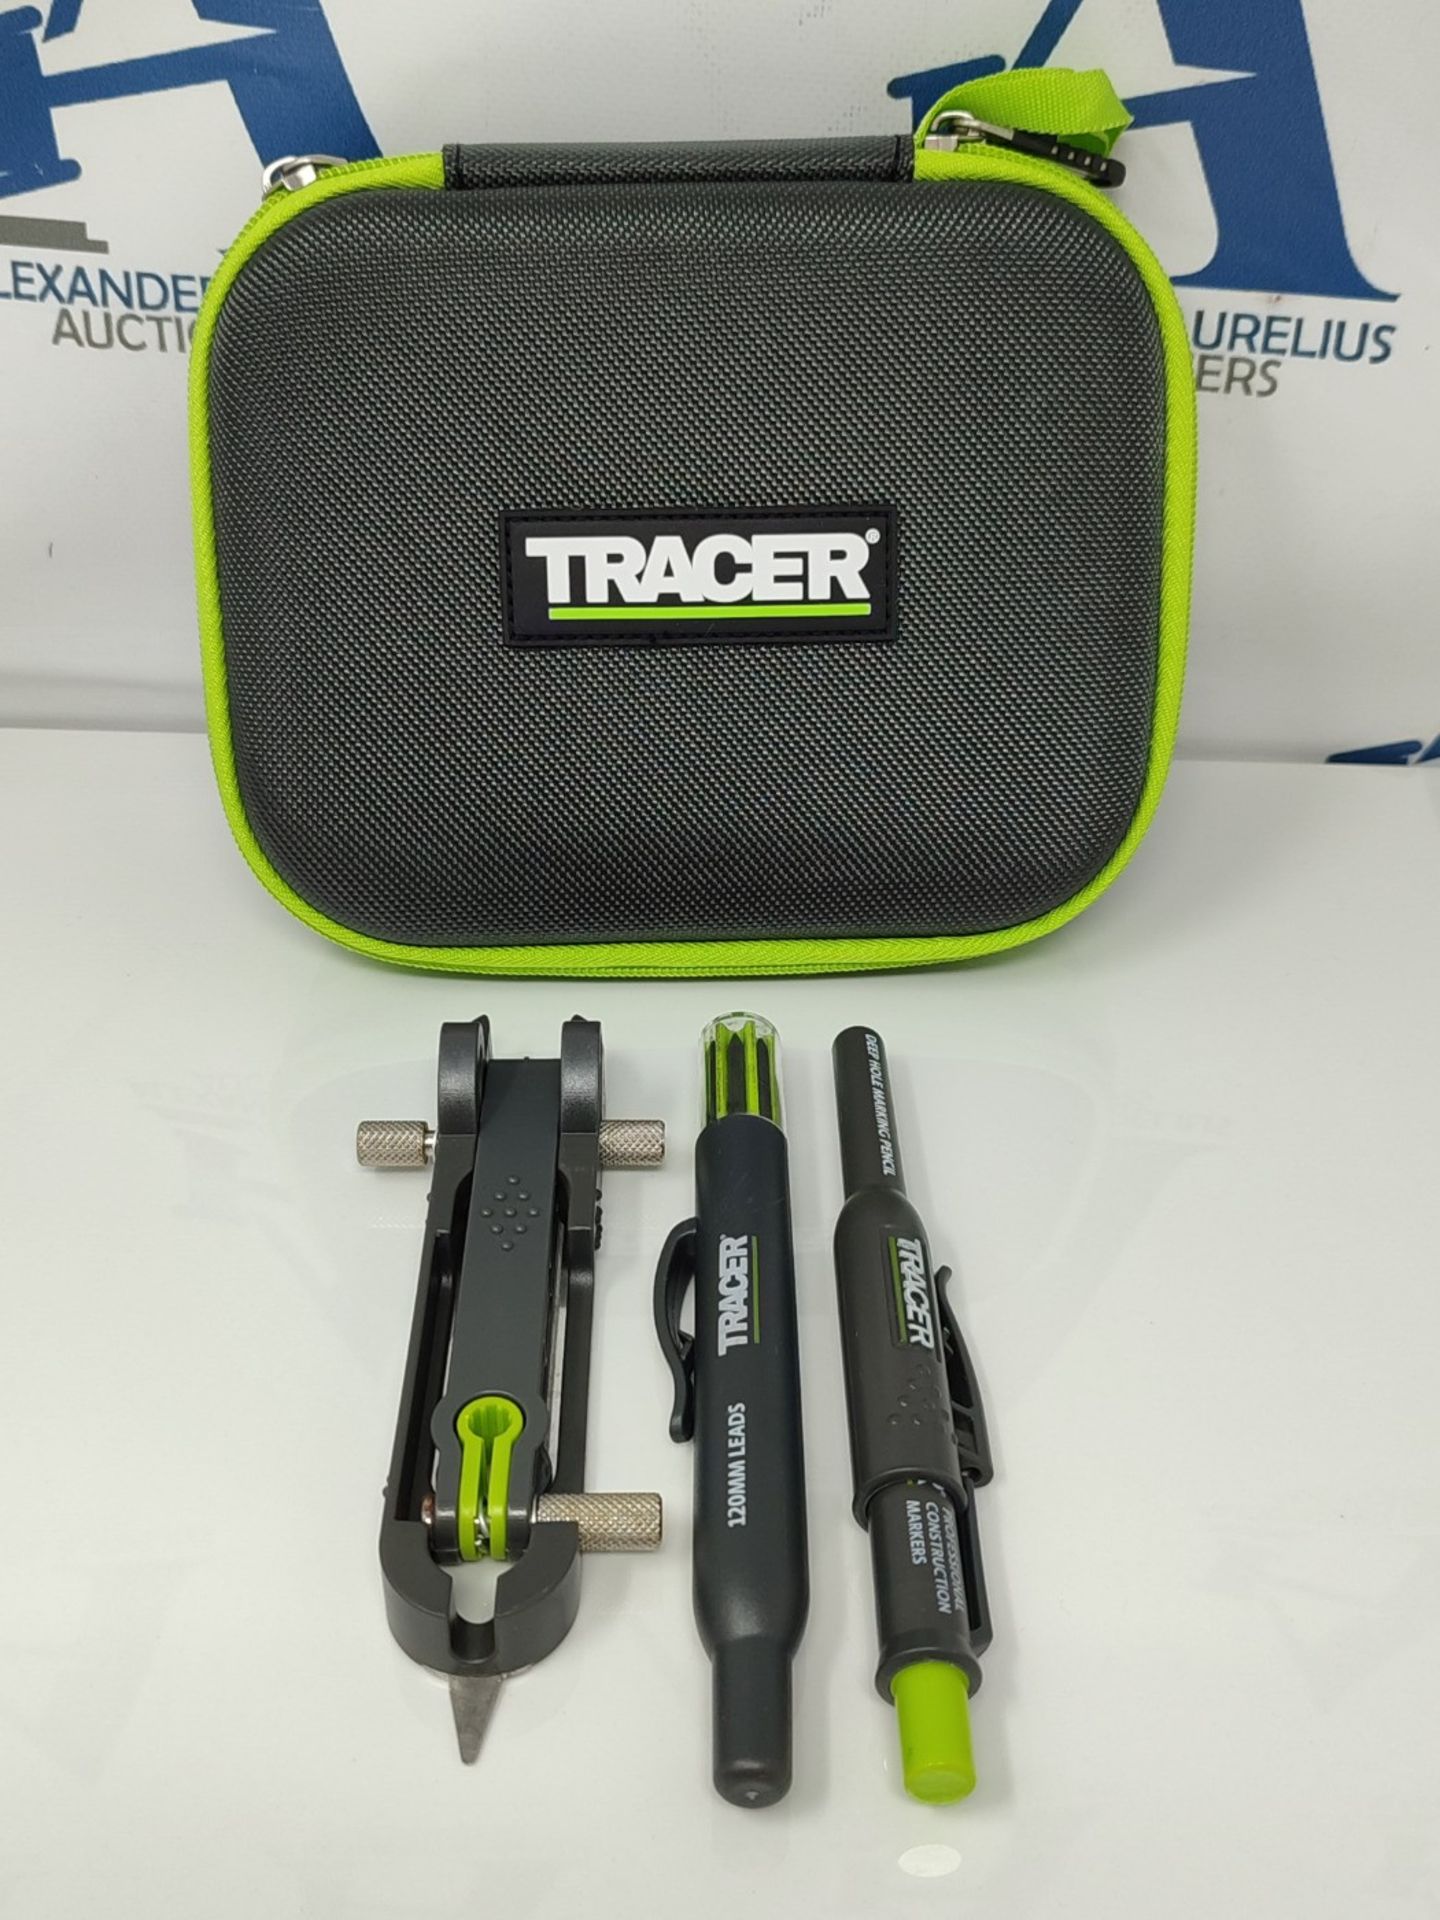 Tracer ProScribe Tool with Deep Hole Pencil, Lead Holster and Carry Case (DIY, Woodwor - Image 3 of 3